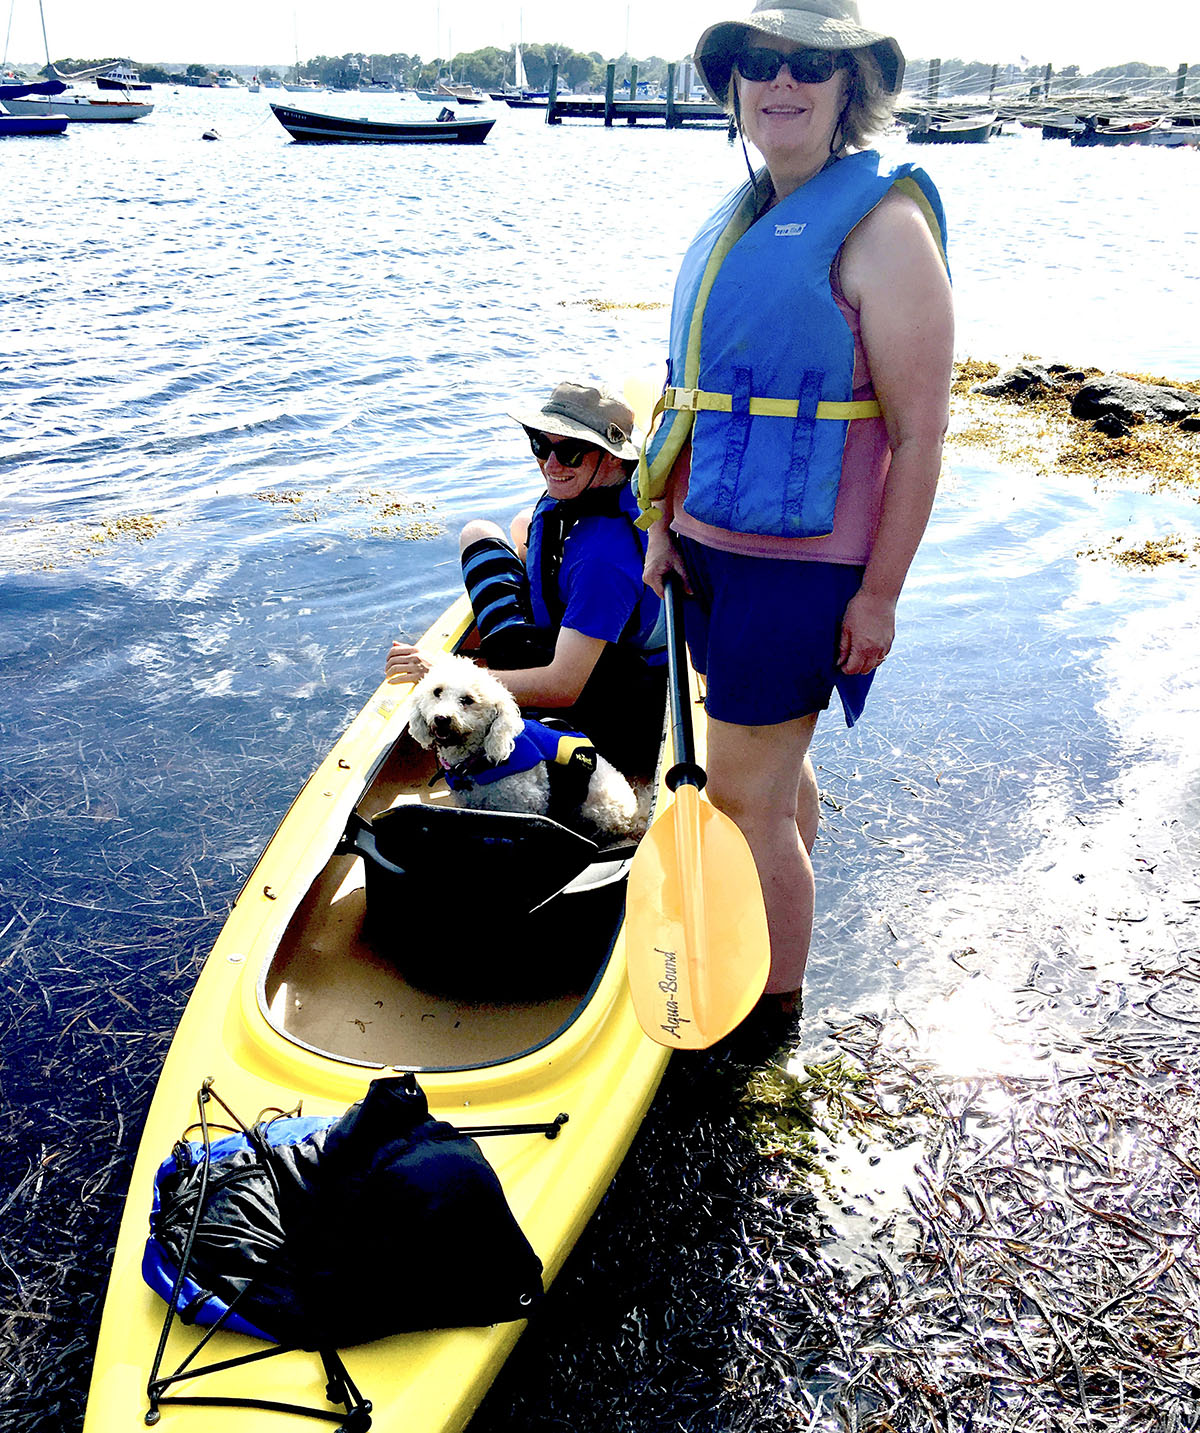 Teresa Jones standing in shallow water next to a yellow kayak with a friend and small dog inside it